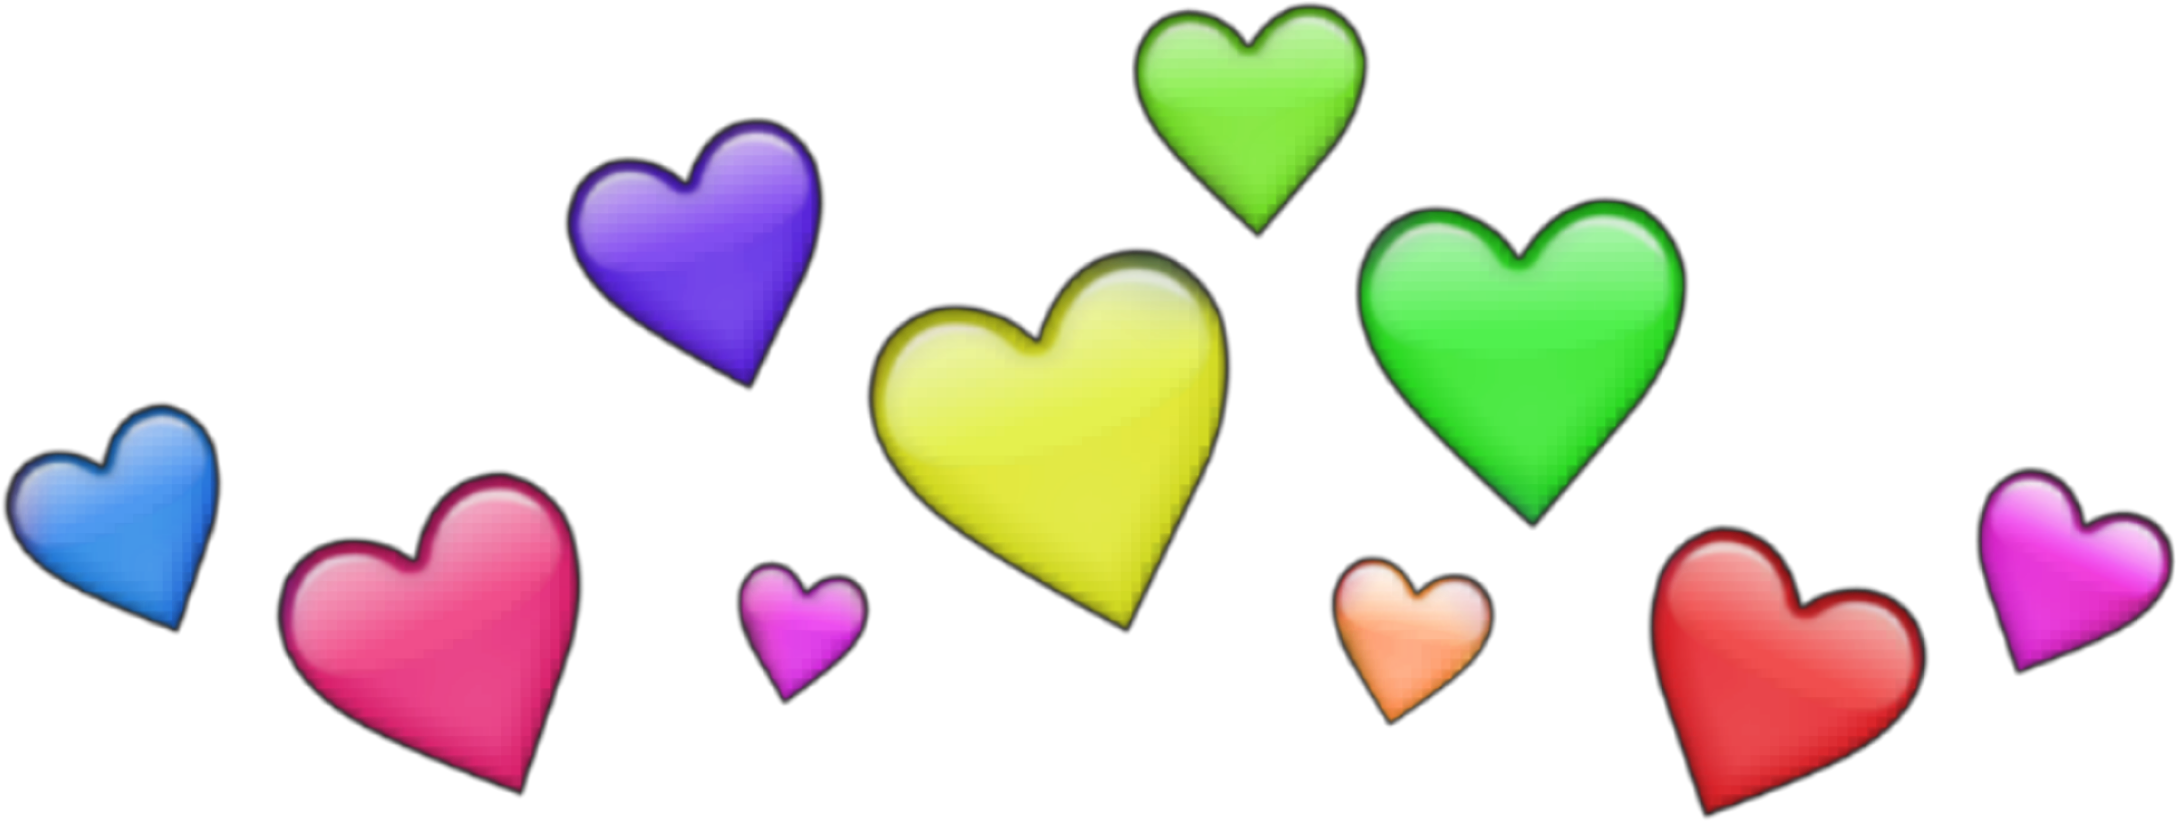 A Group Of Colorful Hearts